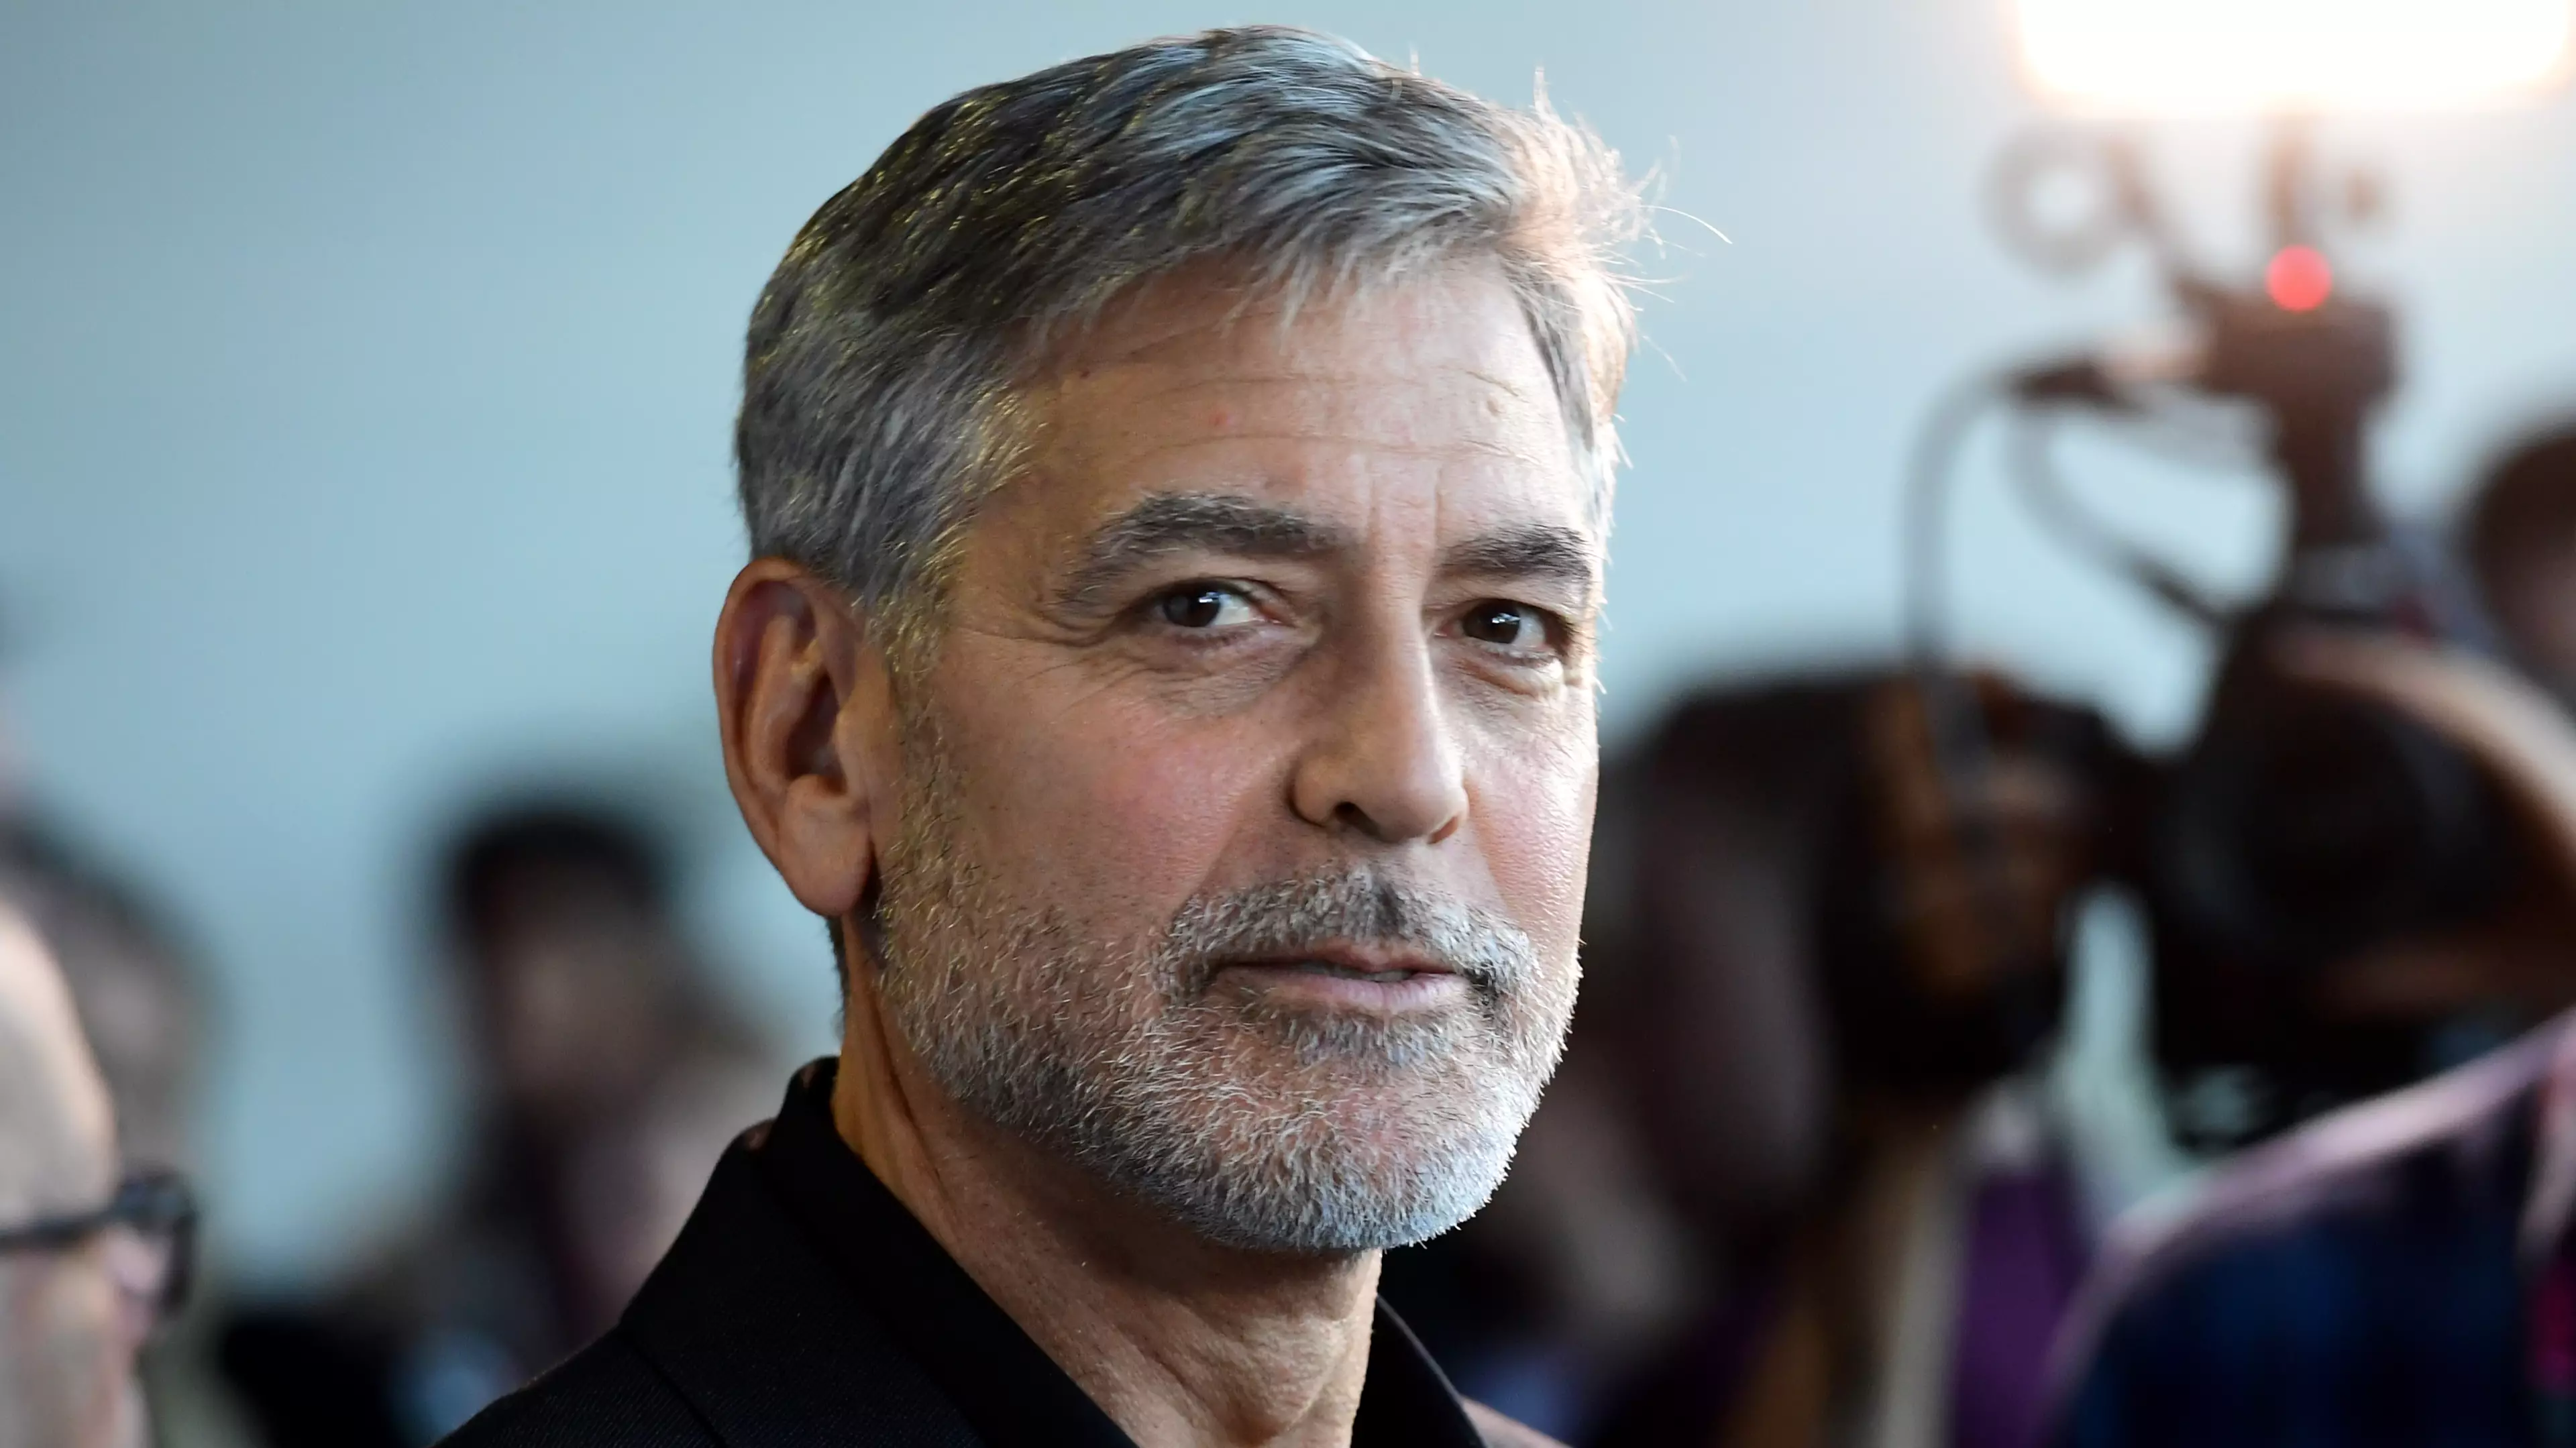 George Clooney Gifted 14 Of His Pals One Million Dollars Each